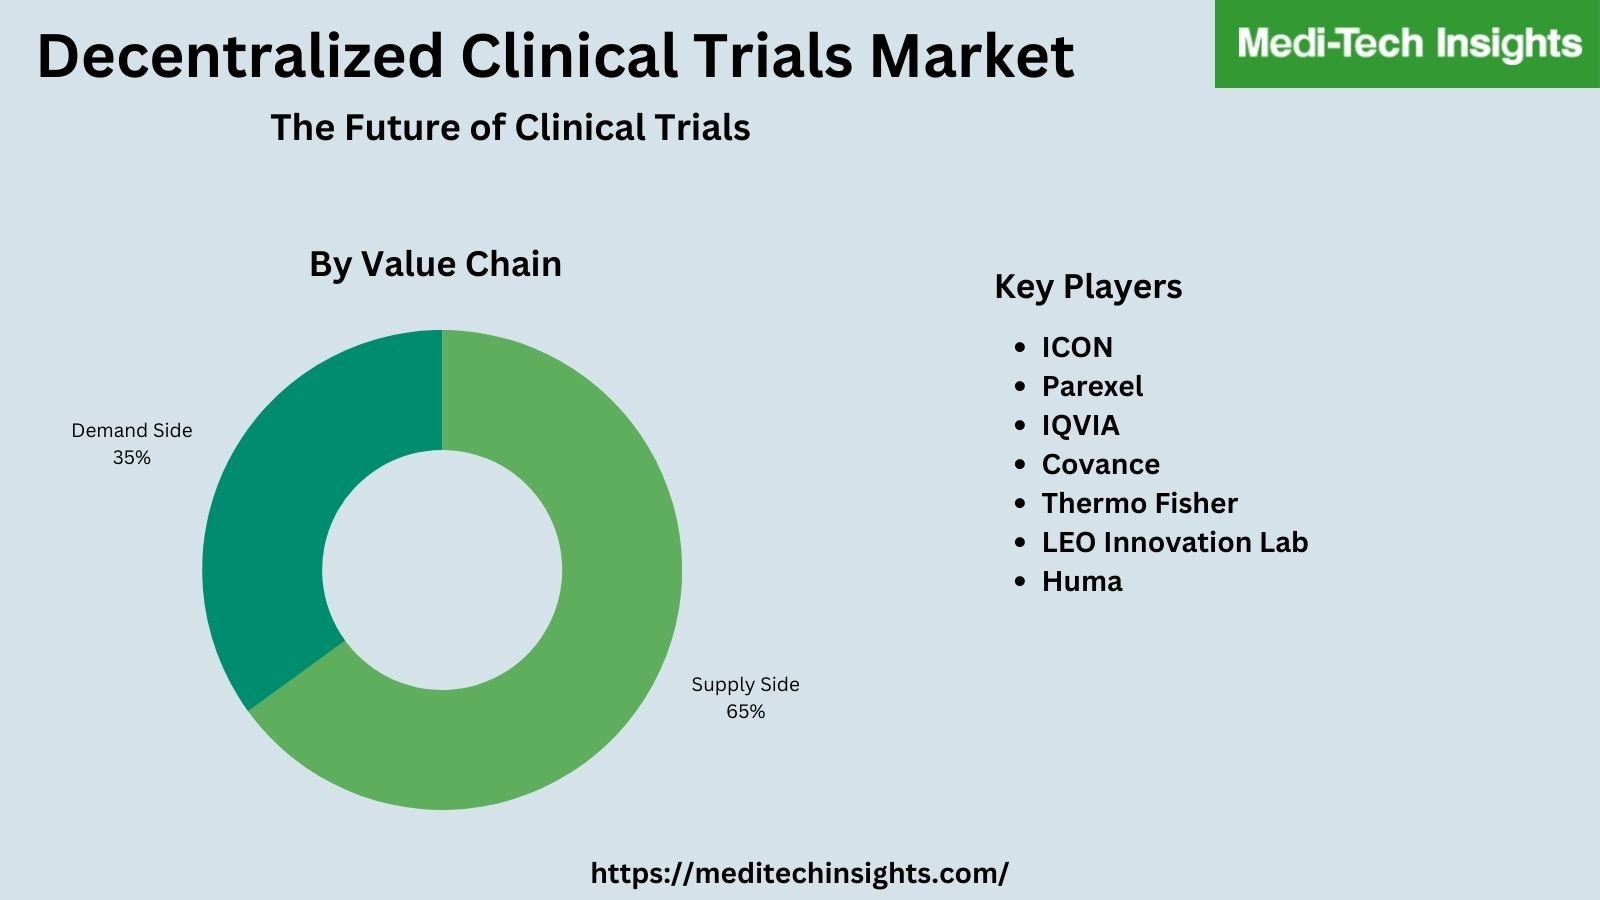 Decentralized Clinical Trials (DCTs) Market valued at US$ 8.8 billion in 2021 and is expected to grow at a CAGR of 10% to reach ~US$ 14.2 billion by 2026